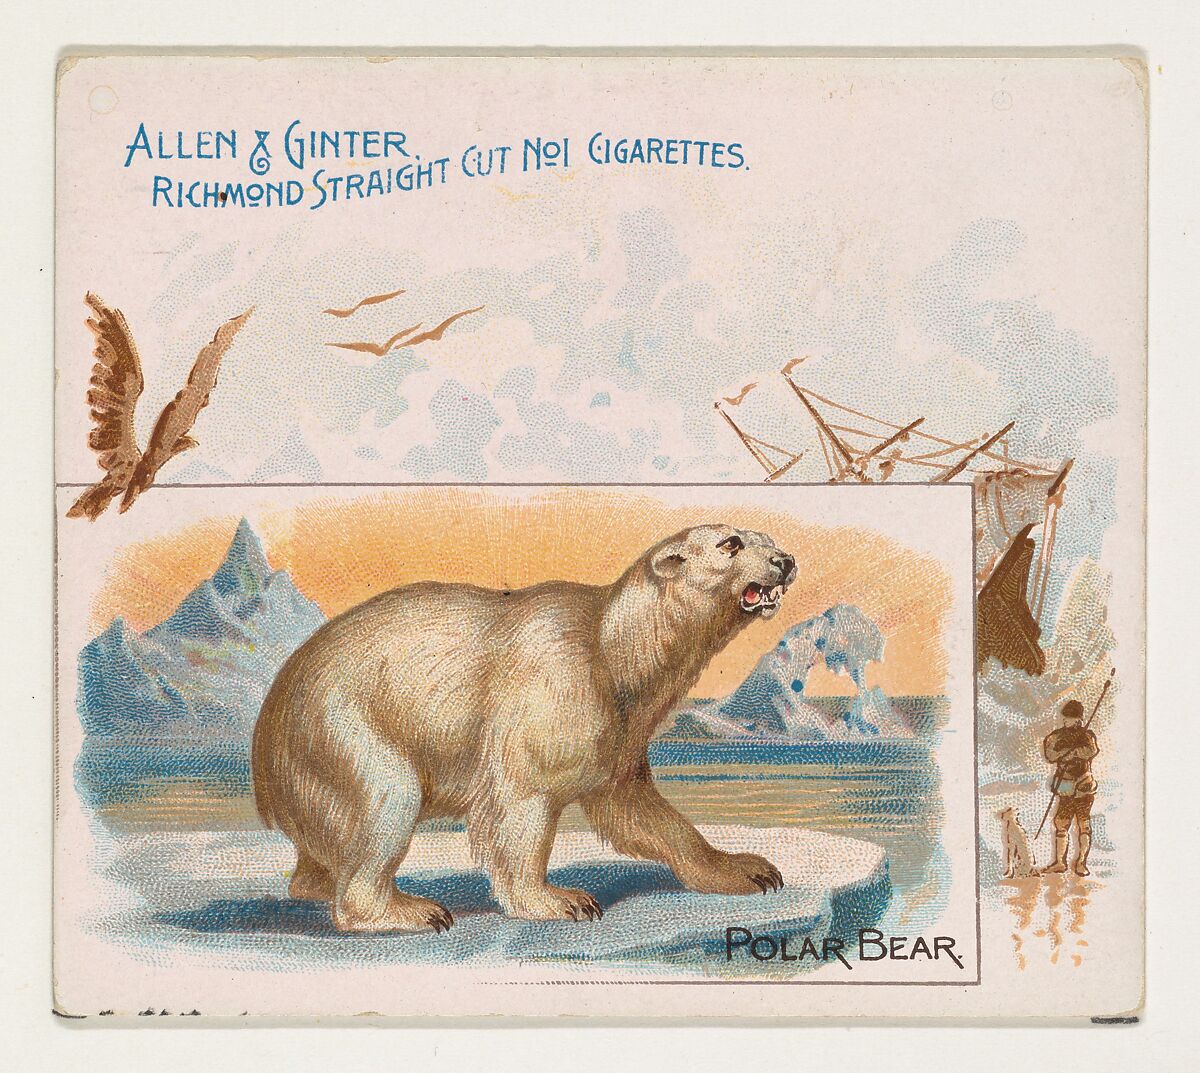 Polar Bear, from Quadrupeds series (N41) for Allen & Ginter Cigarettes, Issued by Allen &amp; Ginter (American, Richmond, Virginia), Commercial color lithograph 